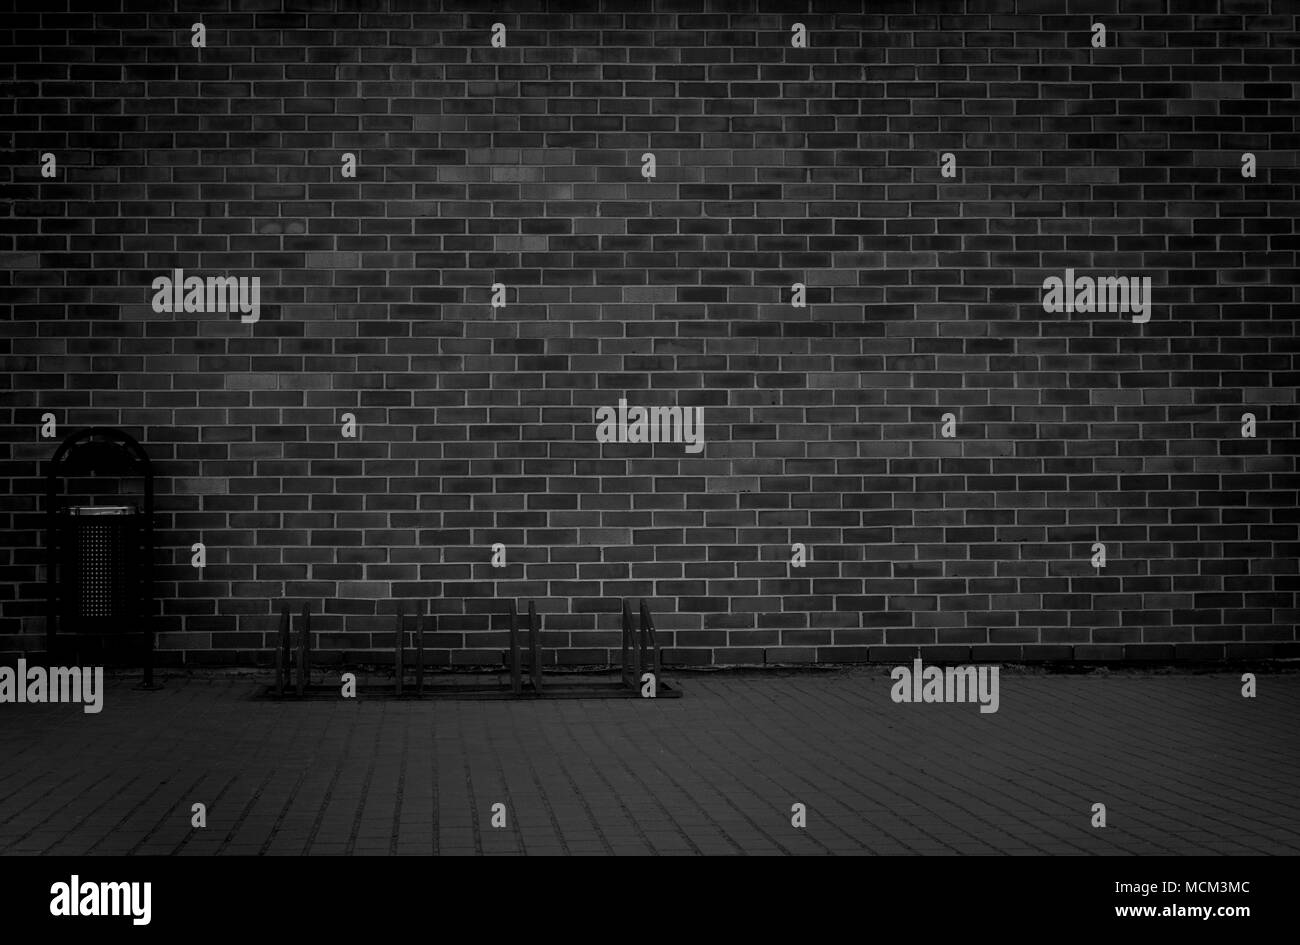 Brick grunge weathered black wall background with walkway and garbage can Stock Photo